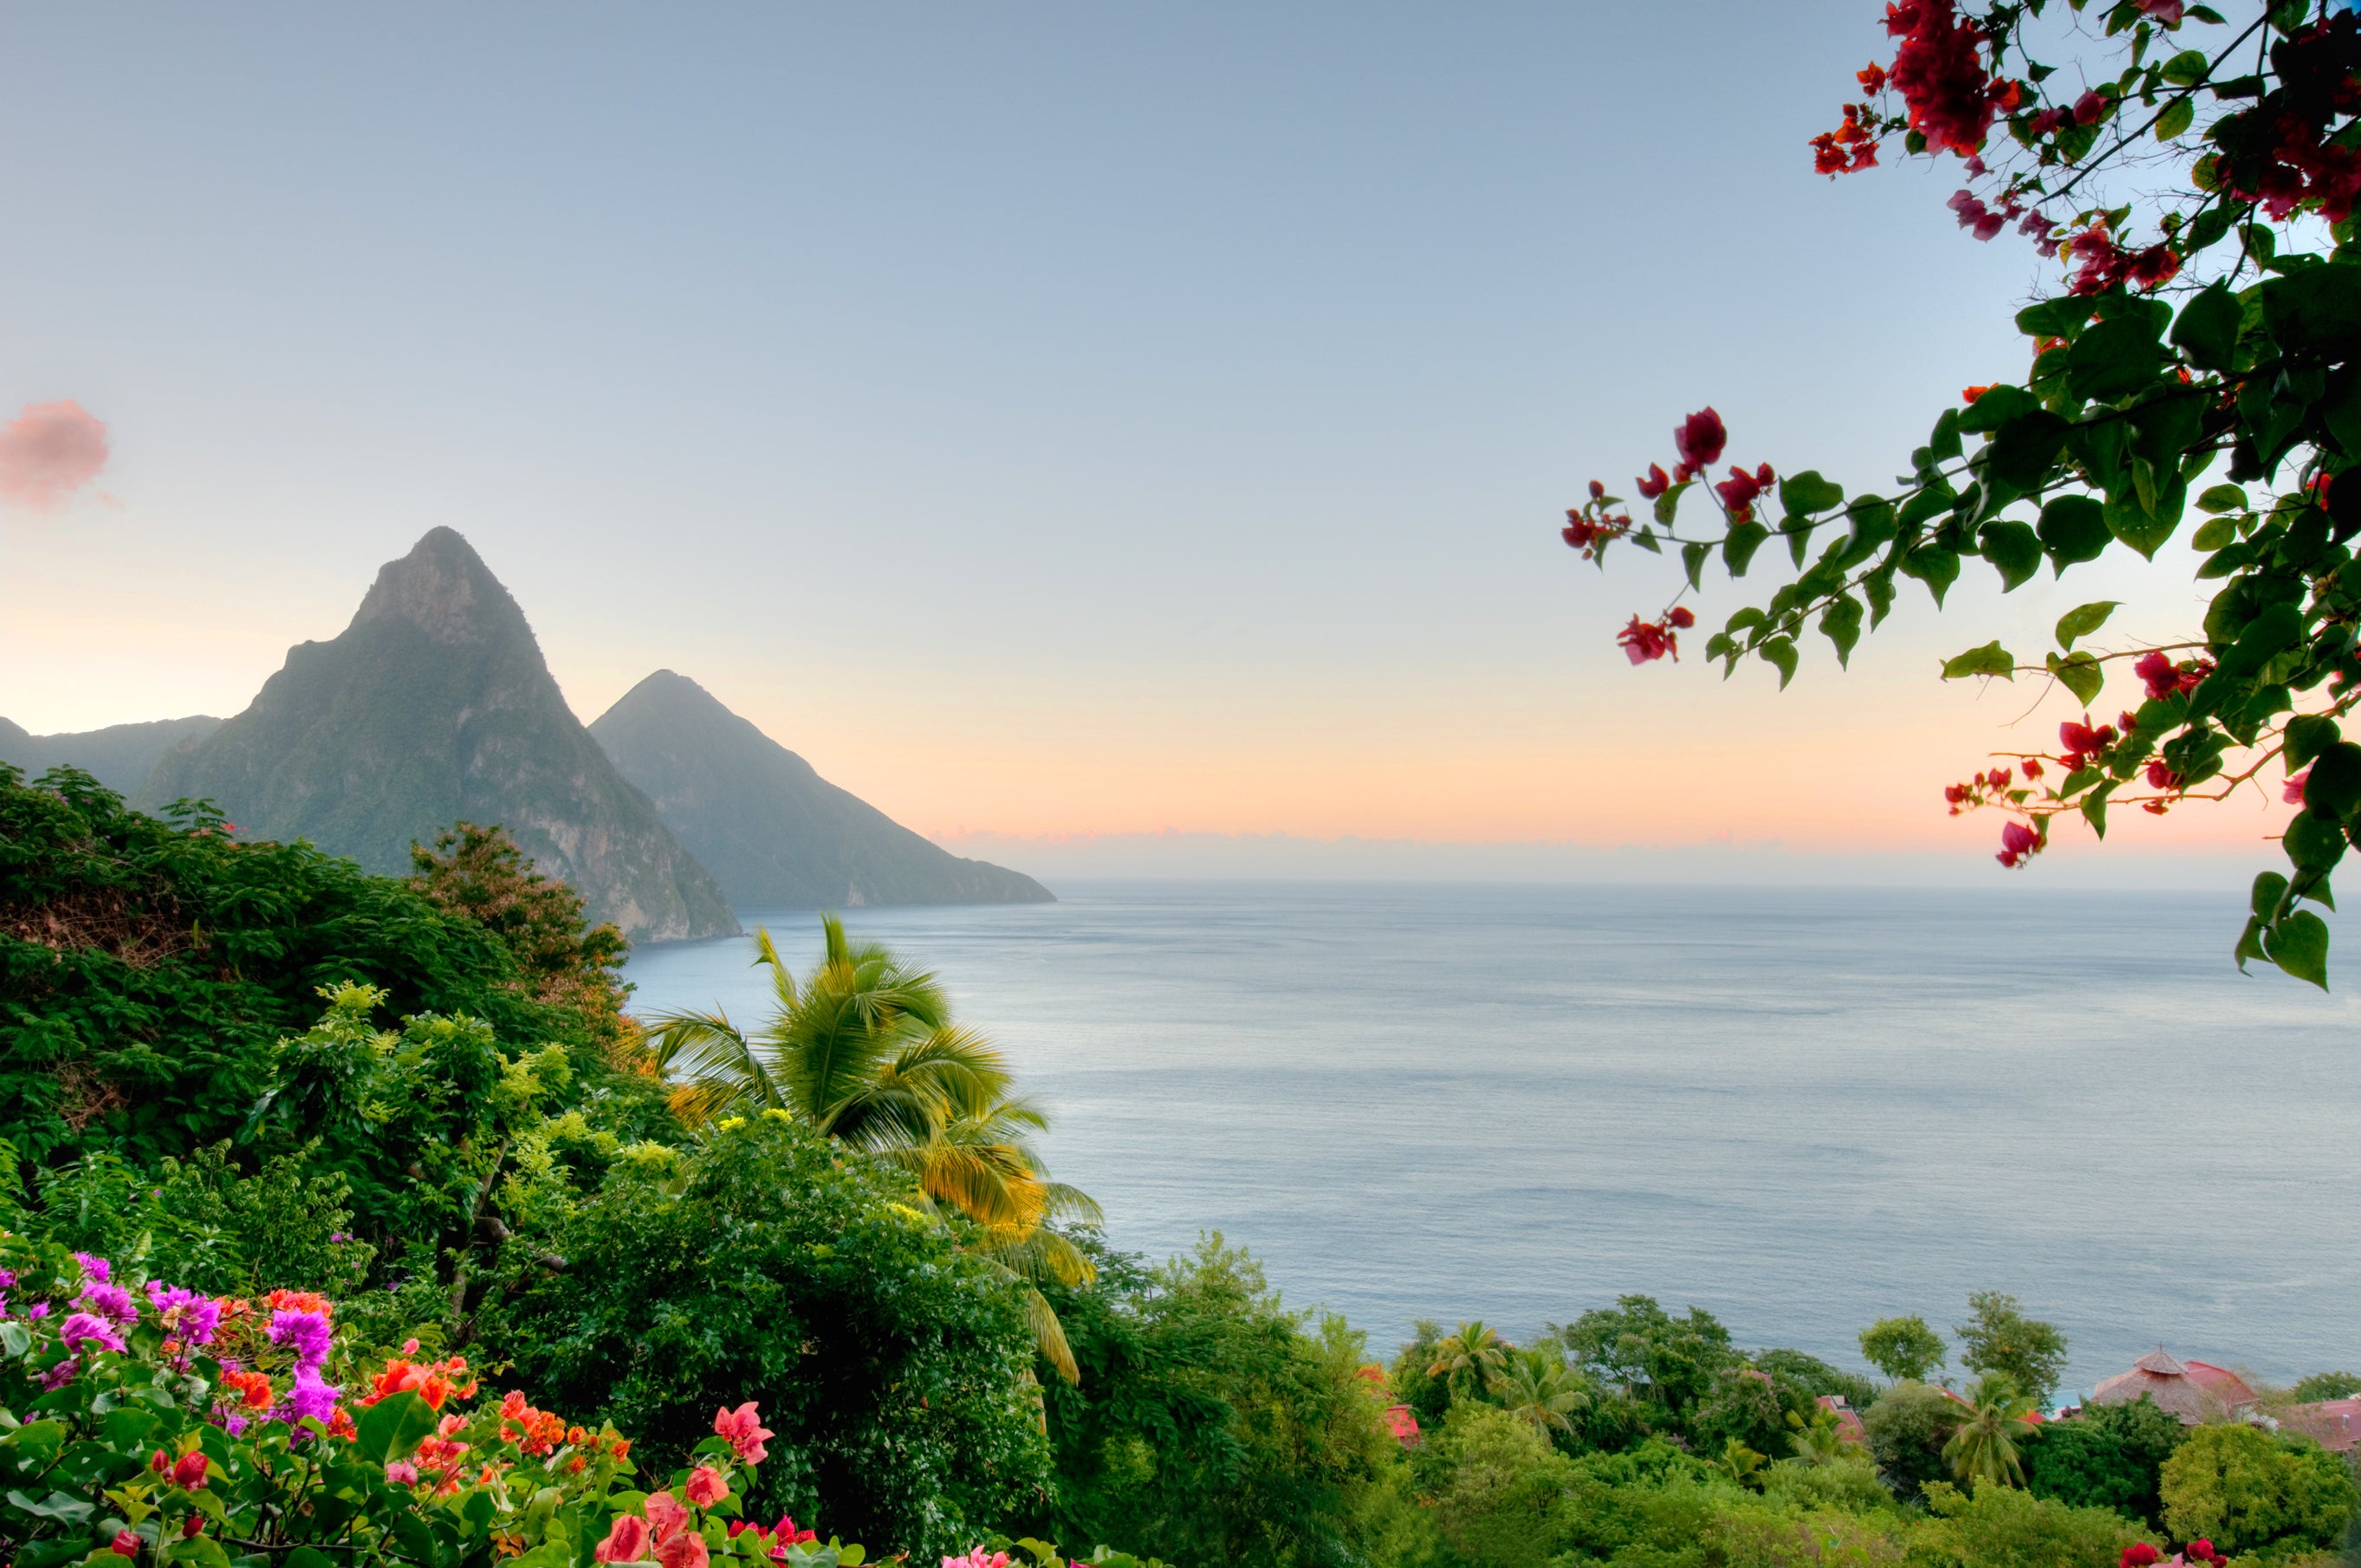 St Lucia’s tropical climate welcomes a balmy but bearable 29C in February